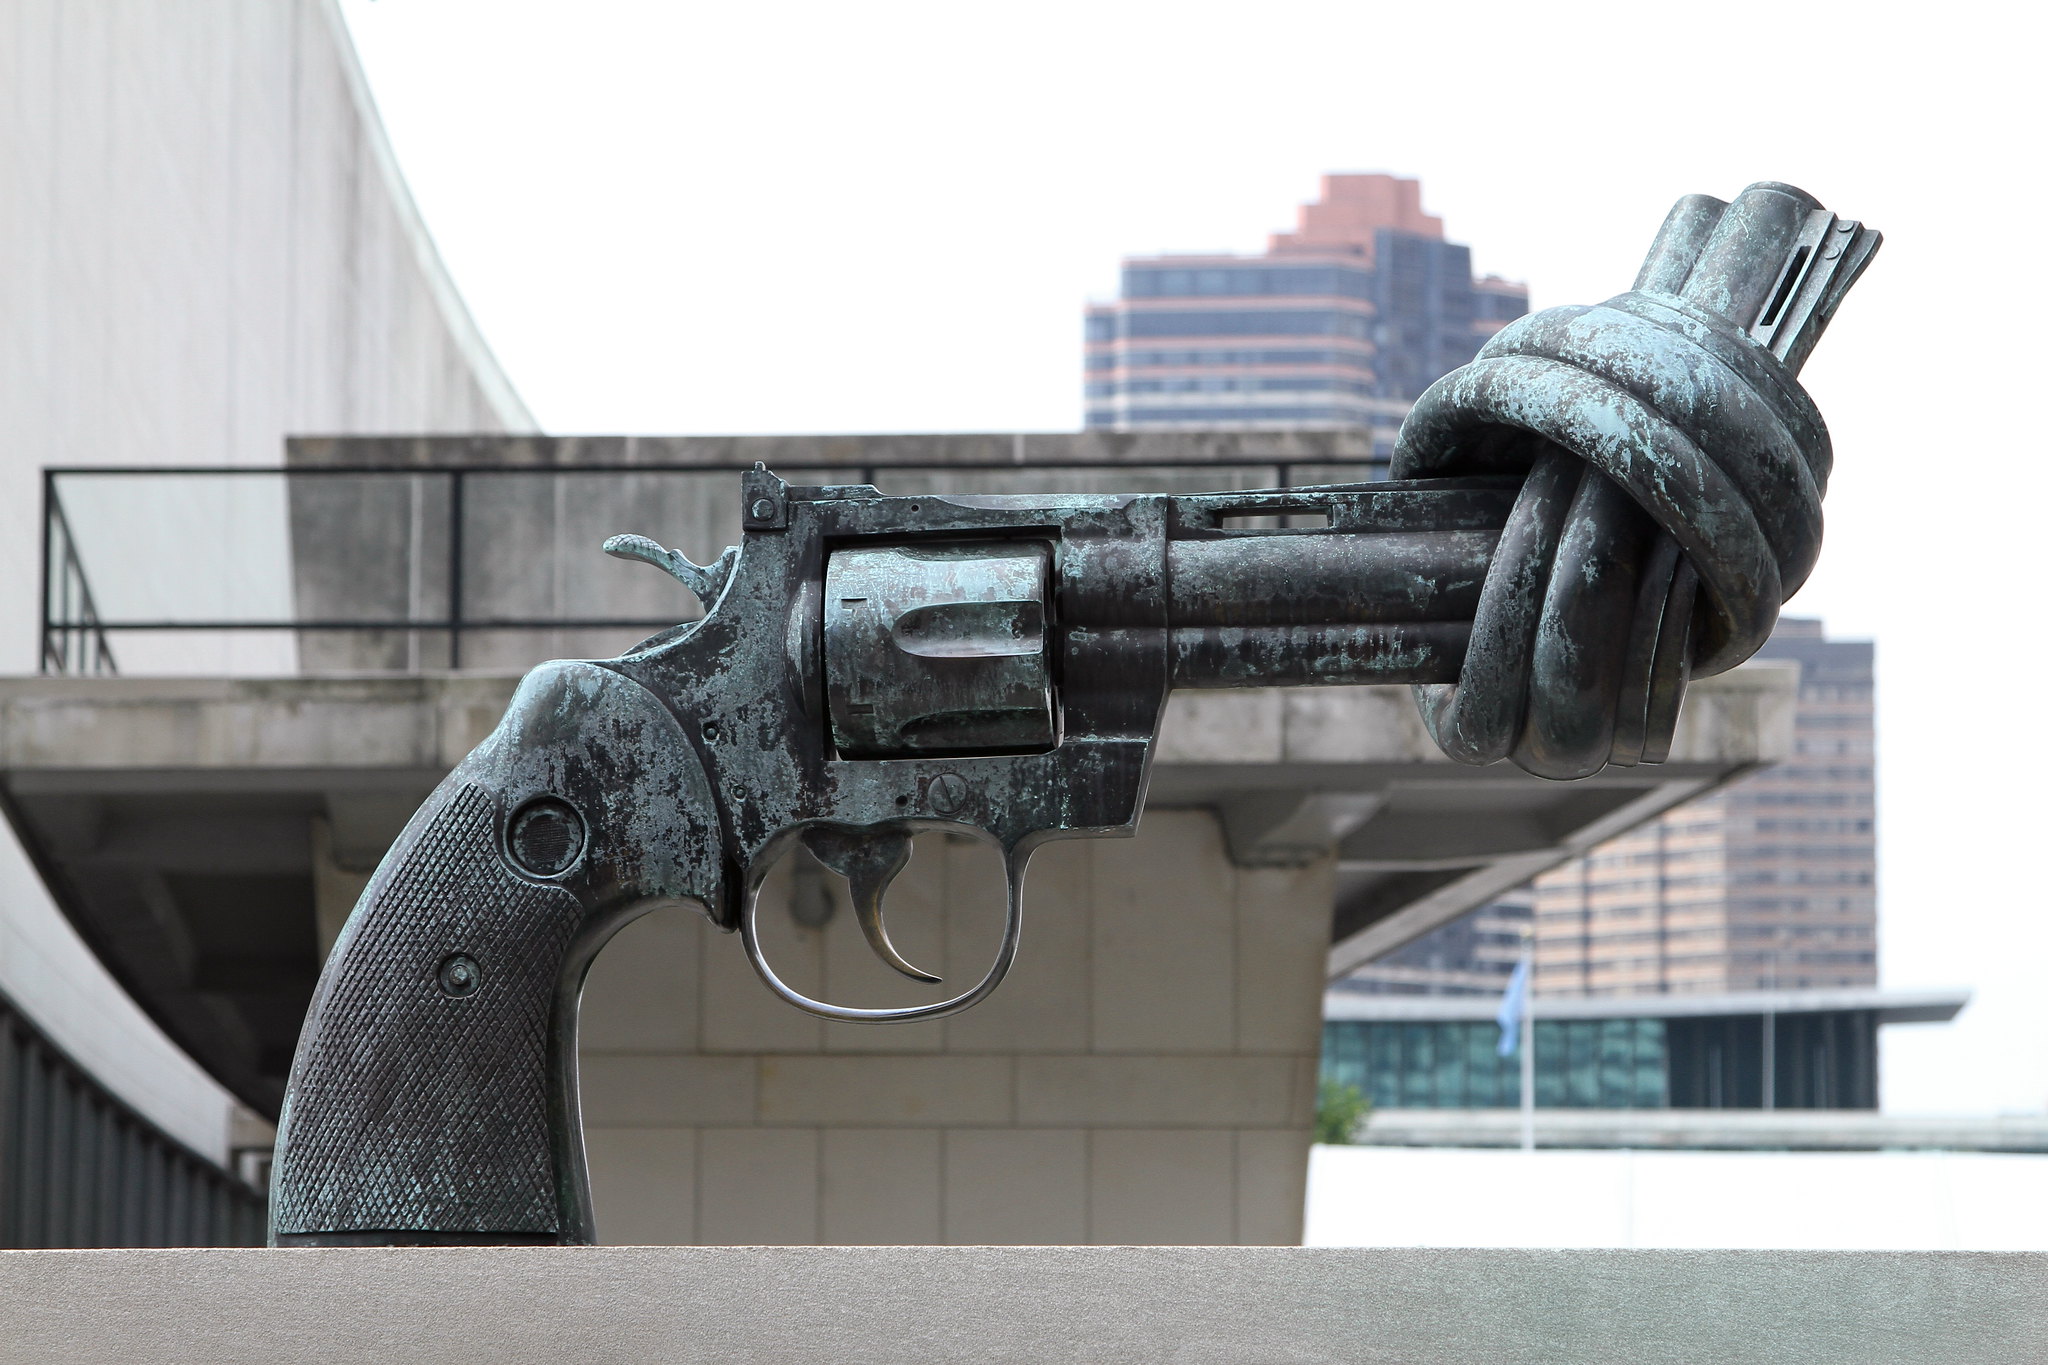 A large statue of a knotted gun at the UN in New York